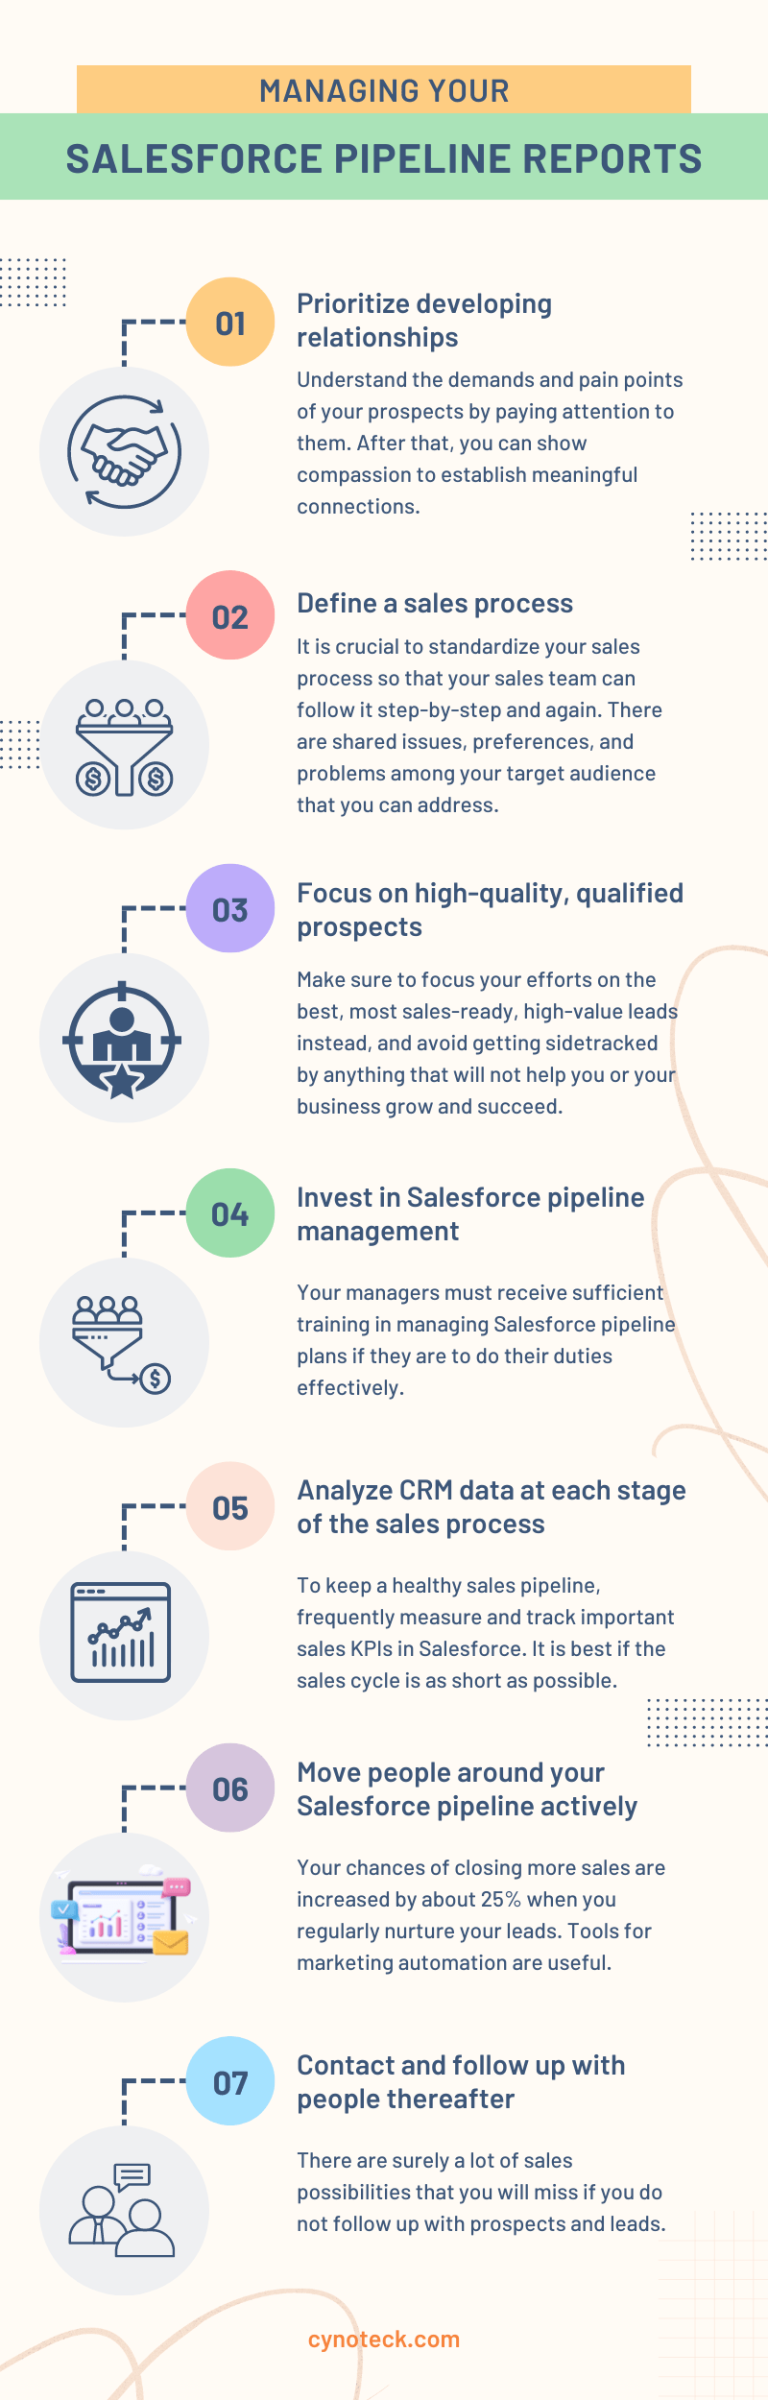 Track Your Sales Performance With Salesforce Pipeline Reports